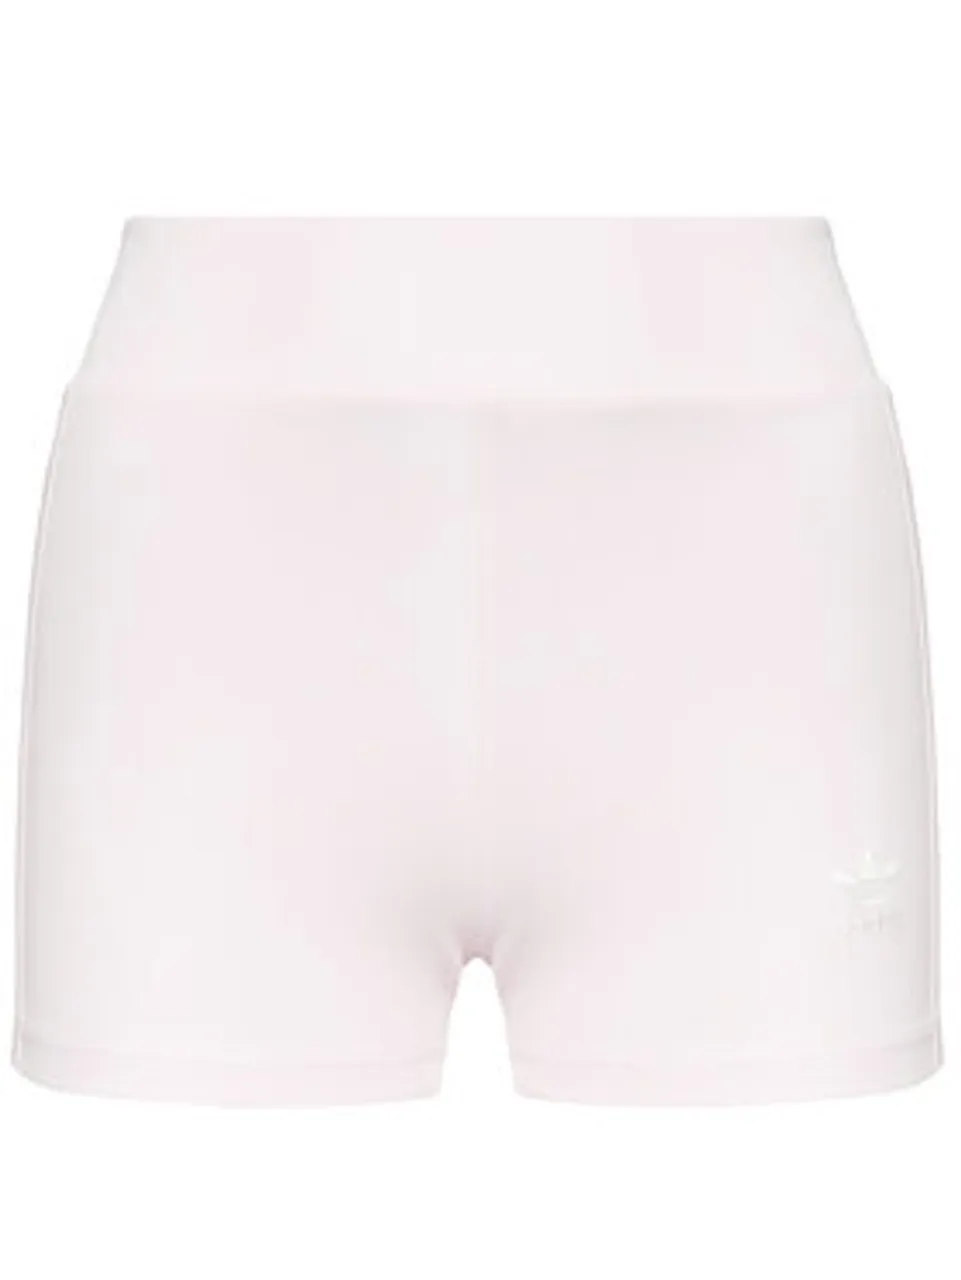 adidas Sportshorts Tennis Luxe Booty H56463 Rosa Slim Fit